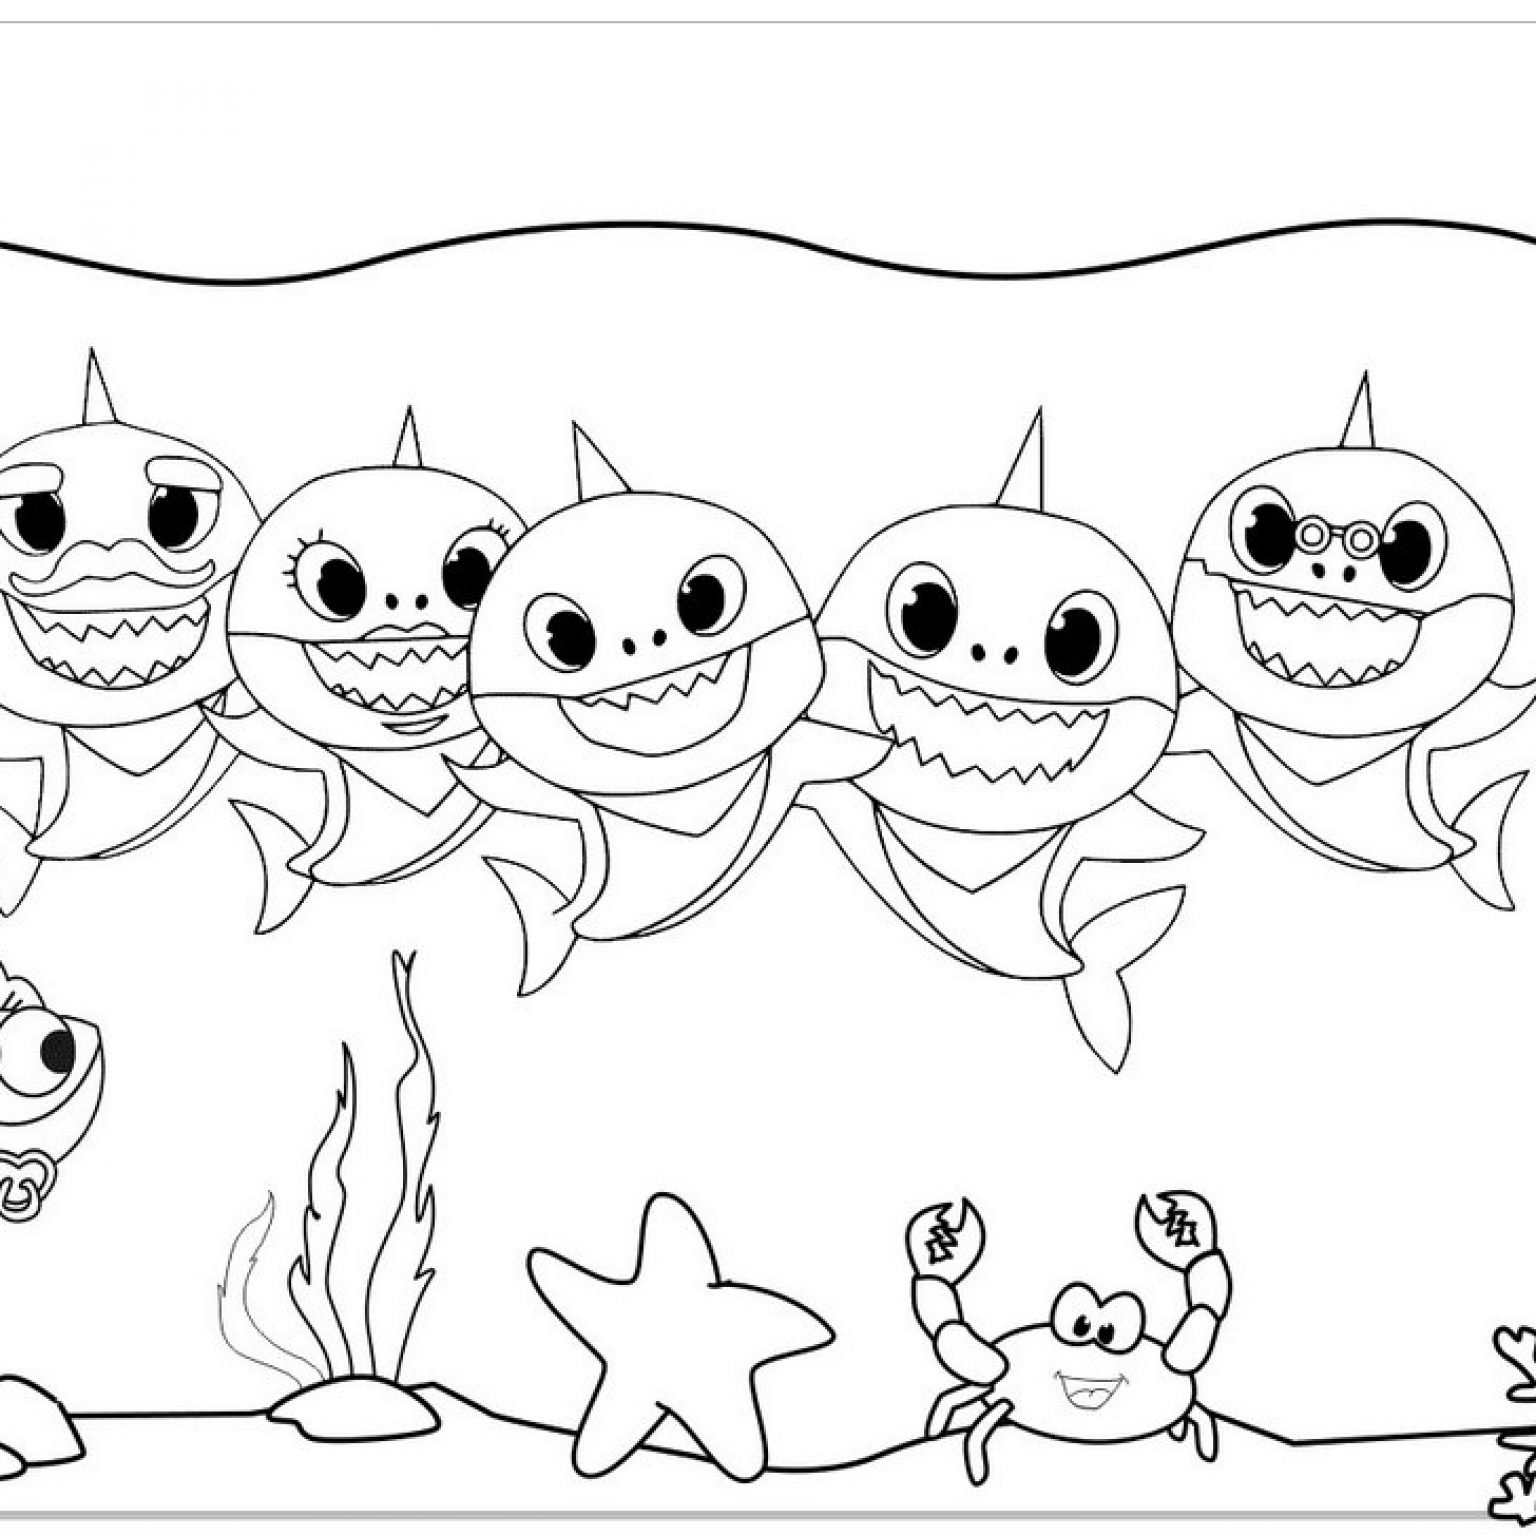 Pinkfong Baby Shark Coloring Page for Kids Mitraland